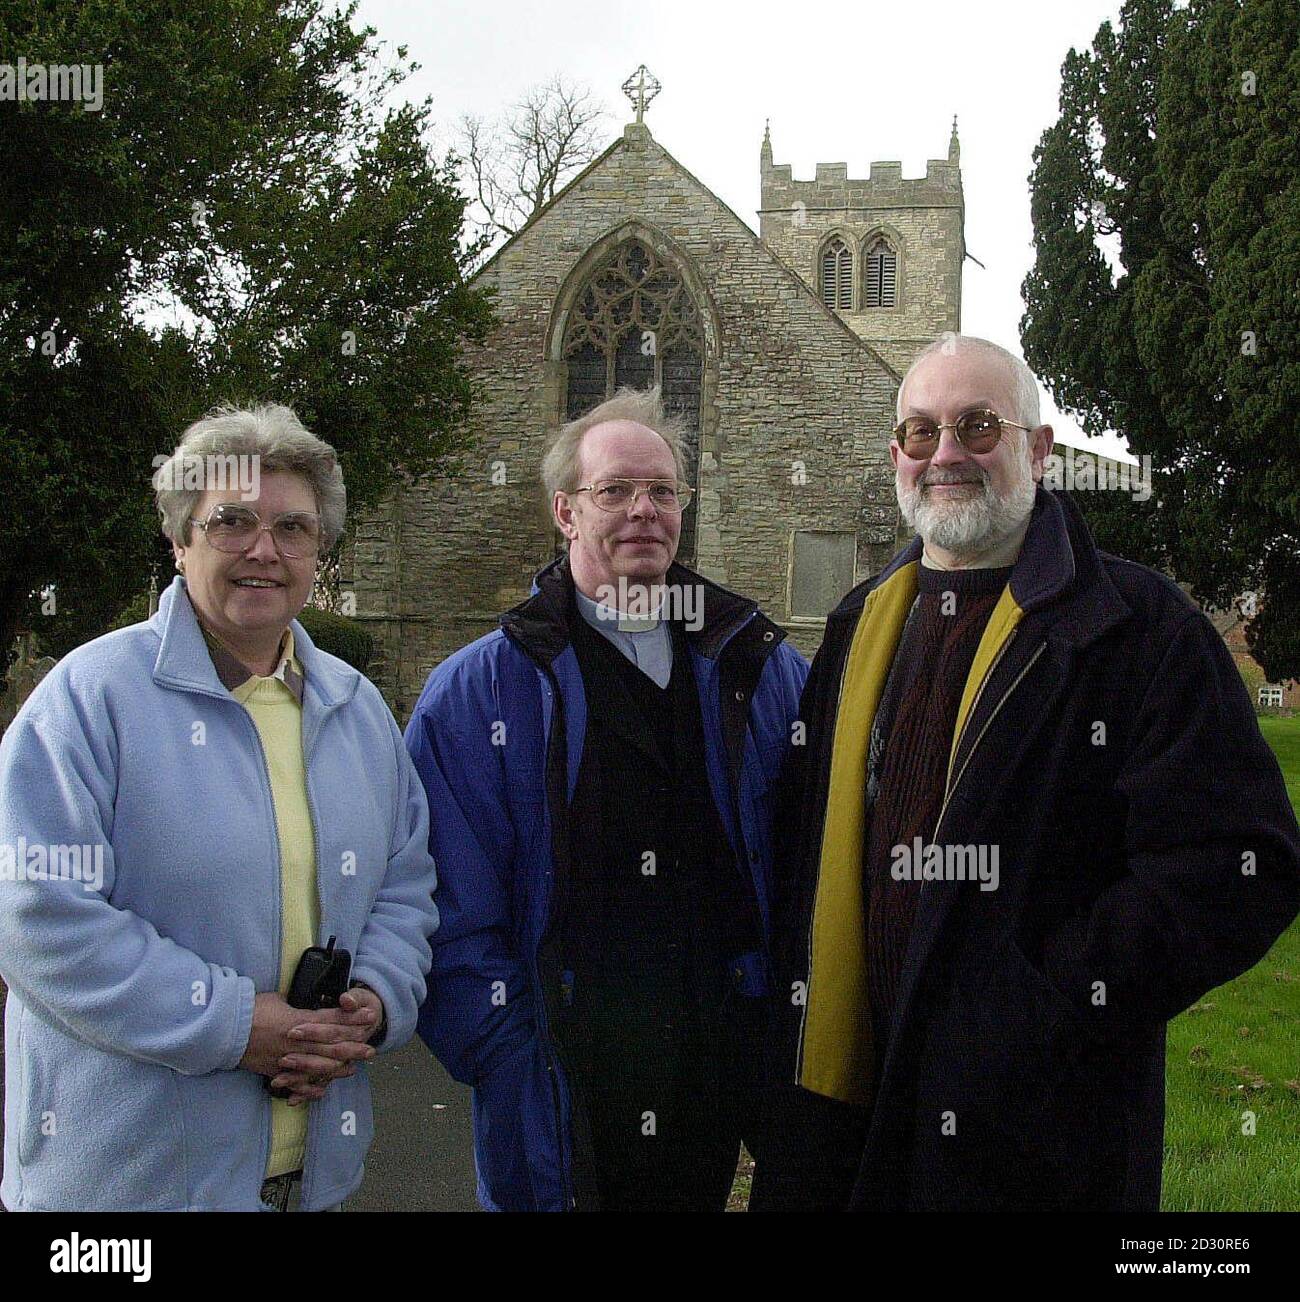 Church wardens Carole Evans and John Martin with the vicar Rev Keith Harrison (centre) by the parish church of St John the Baptist, in Warwickshire, as a High Court judge upheld a 1932 law forcing a pair of Warwickshire landowners to pay costly repairs. * ...of more than 95,000 to the chancel of the ancient parish church. Andrew and Gail Wallbank, who have a sheep farm in Carno, Powys, had challenged their liability to pay the sum, plus interest, imposed under the Chancel Repairs Act 1932. 17/5/2001: landowner Andrew Wallbank, who, with his wife, Gail, have won an appeal at the High Court in Stock Photo